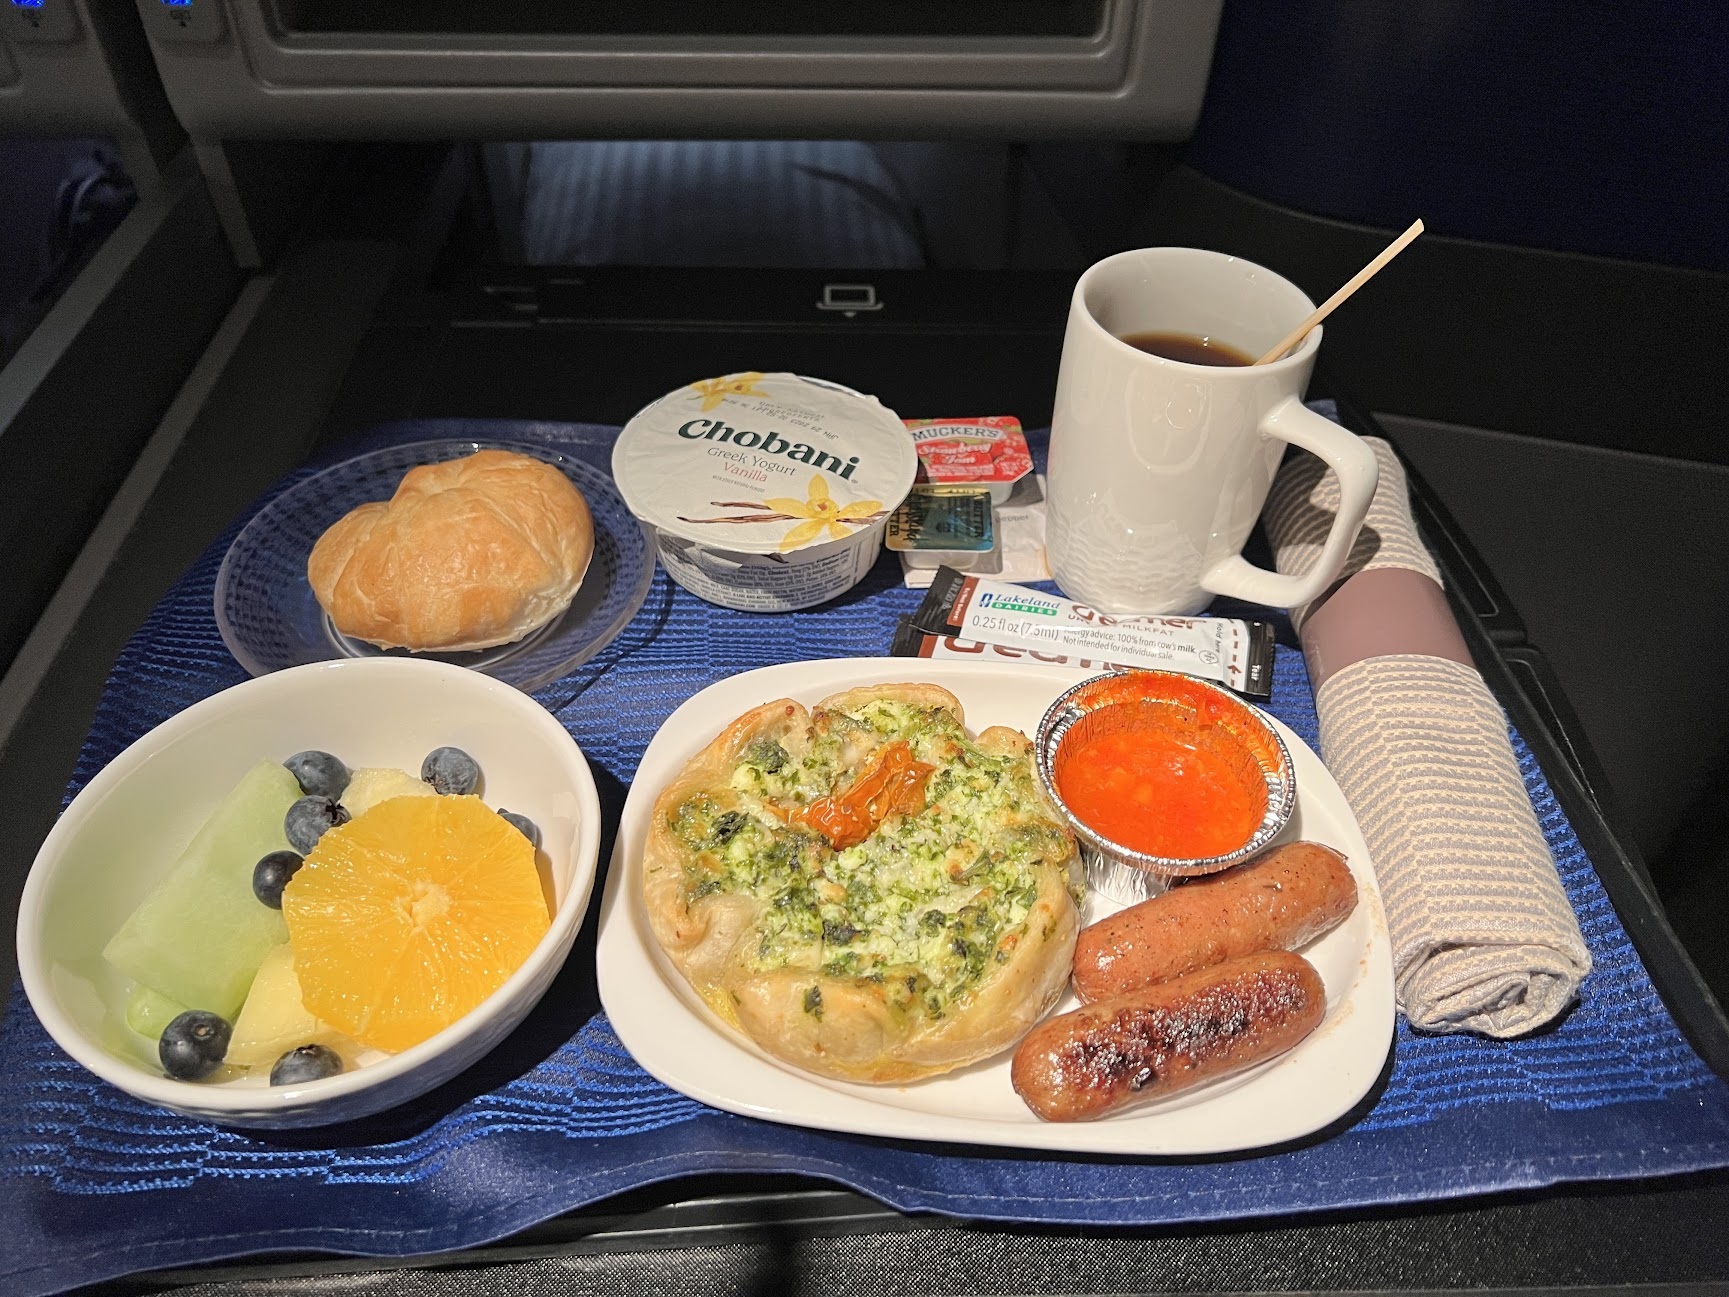 a tray of food and coffee on a blue surface